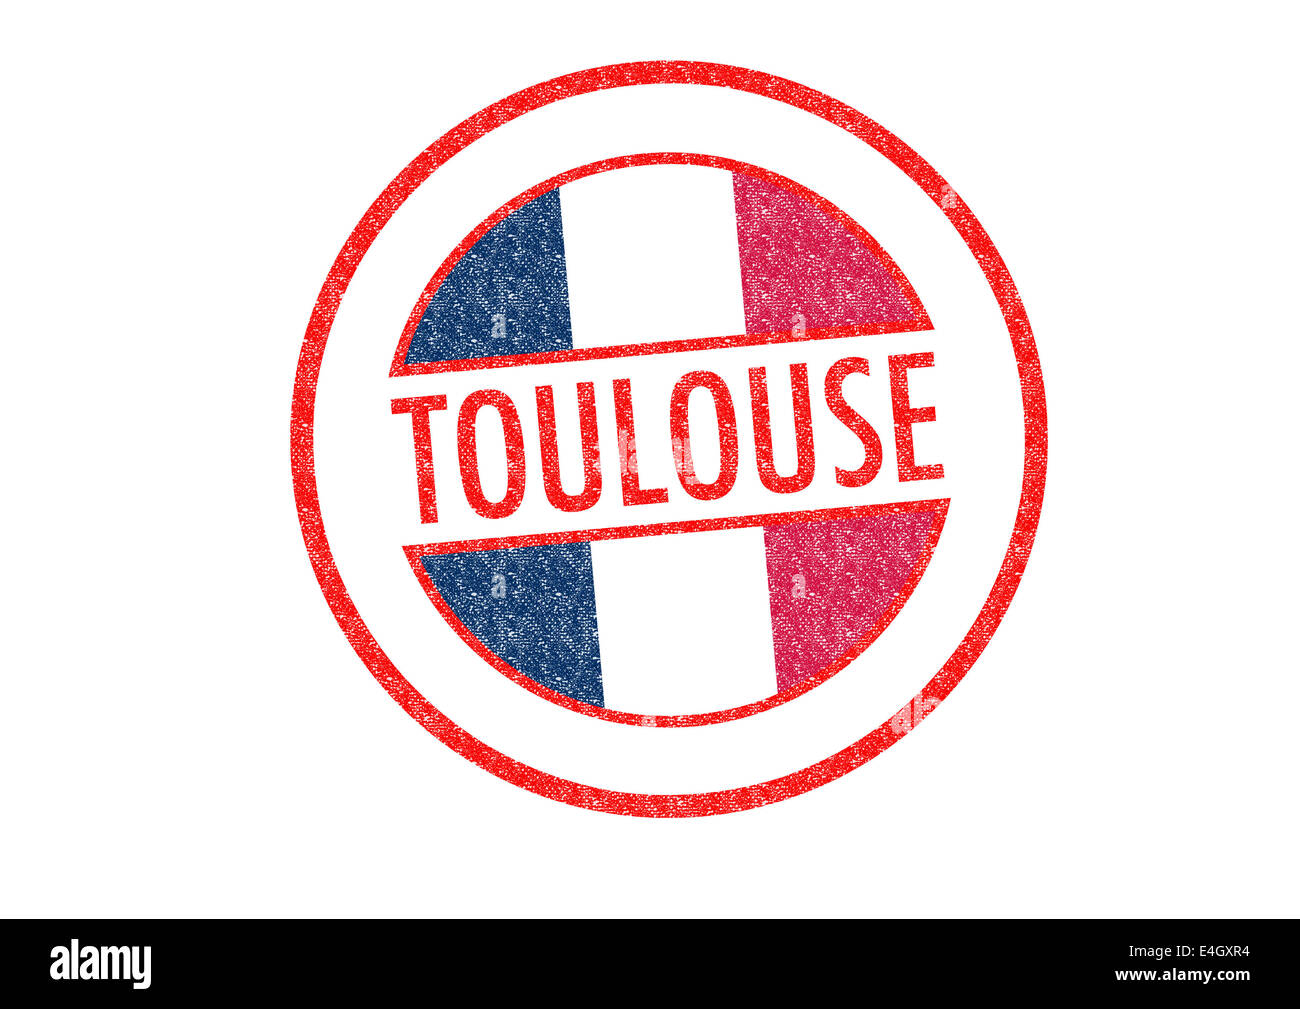 Passport-style TOULOUSE rubber stamp over a white background. Stock Photo